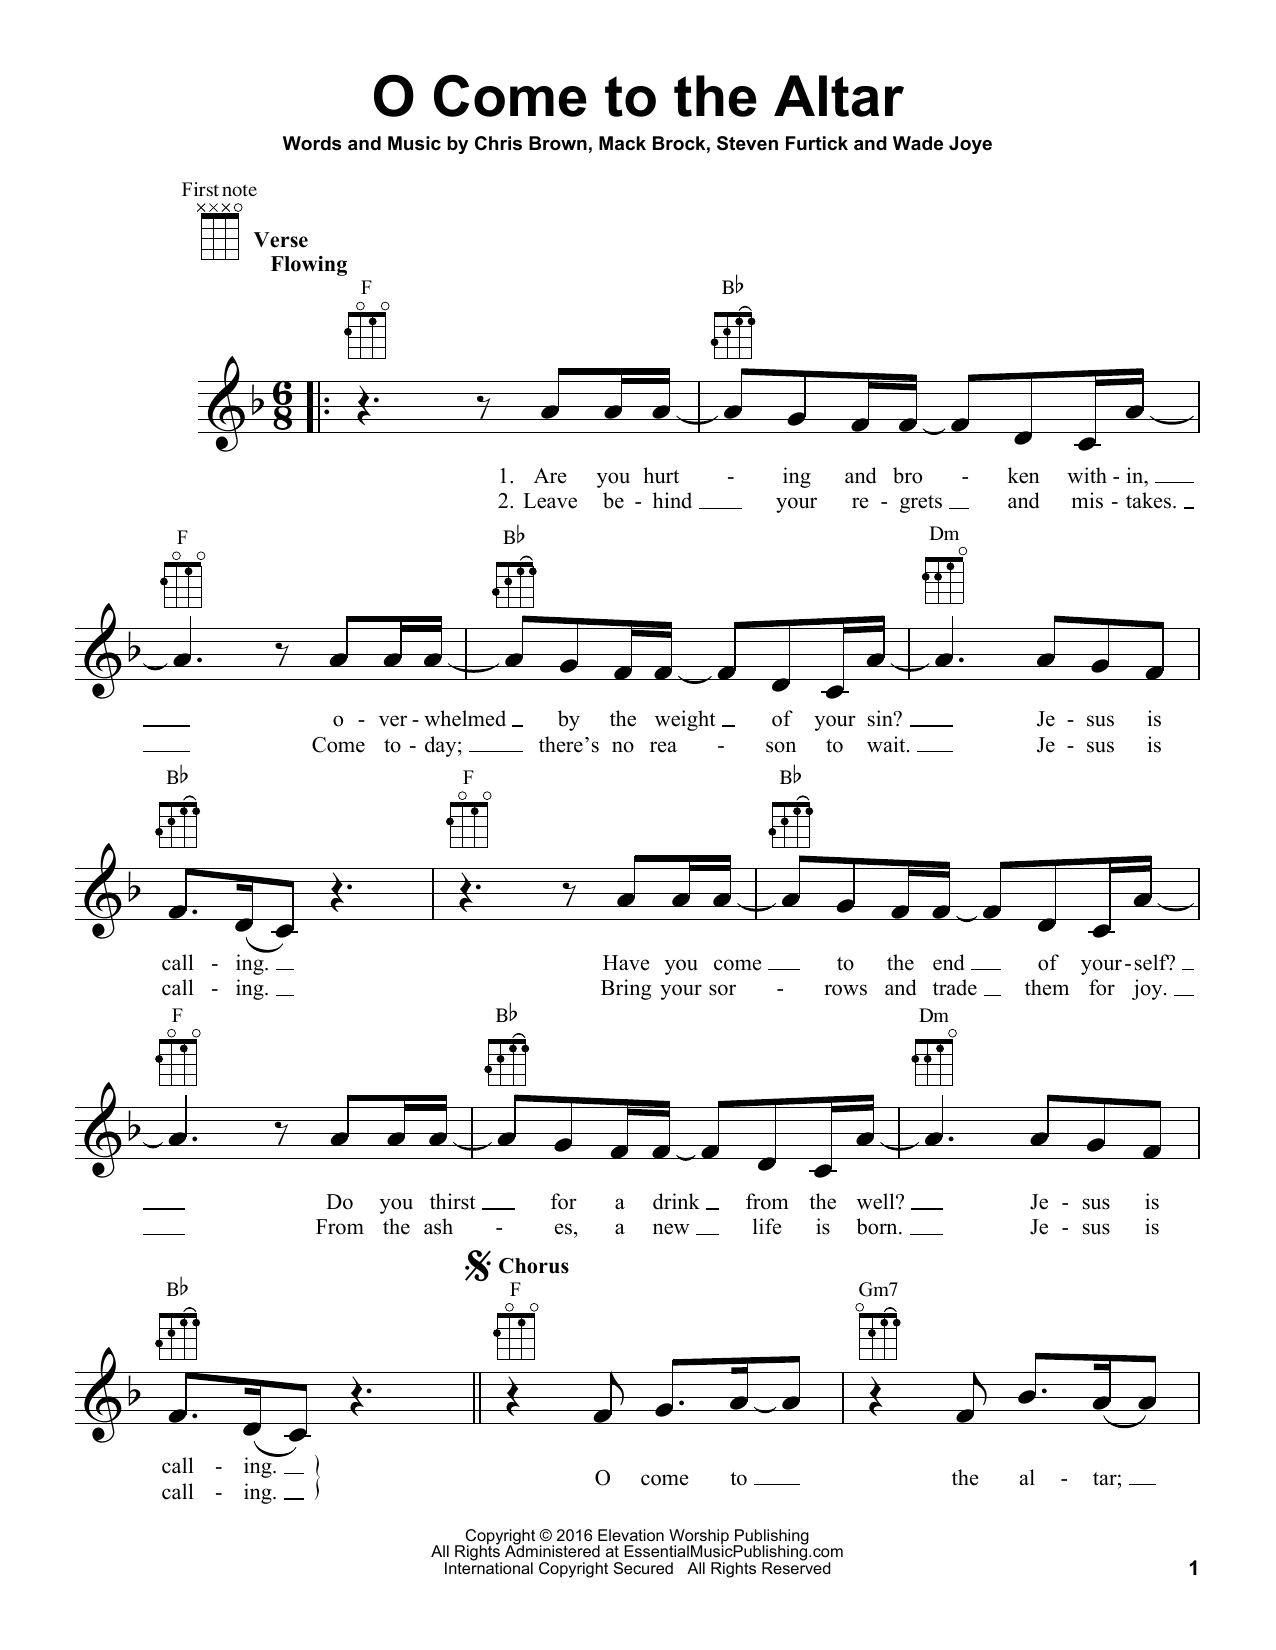 Elevation Worship O Come To The Altar sheet music notes and chords. Download Printable PDF.